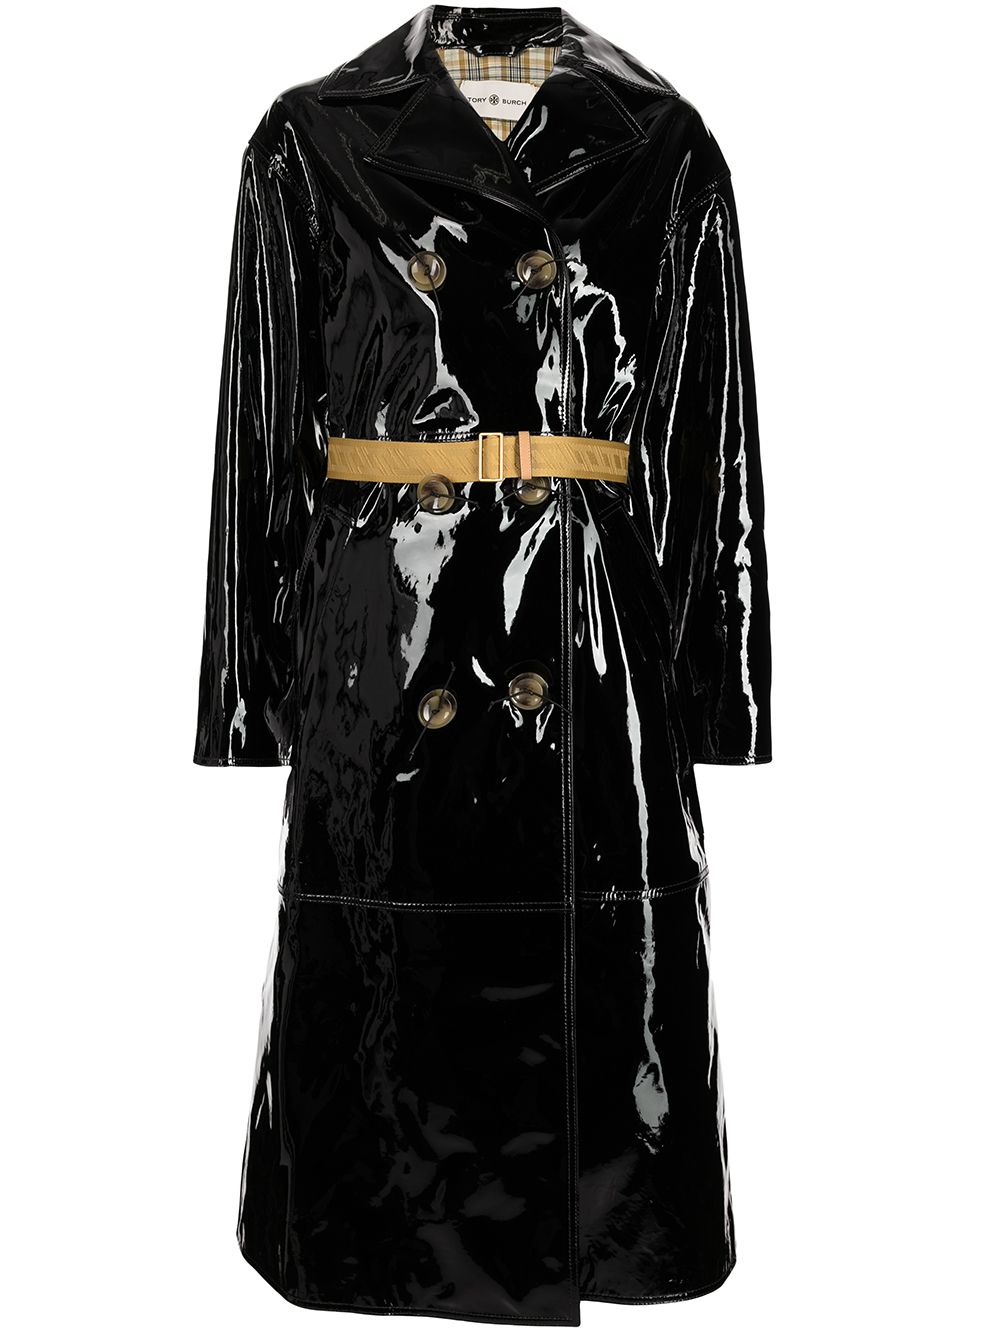 Tory Burch Patent Leather Trench Coat - Farfetch